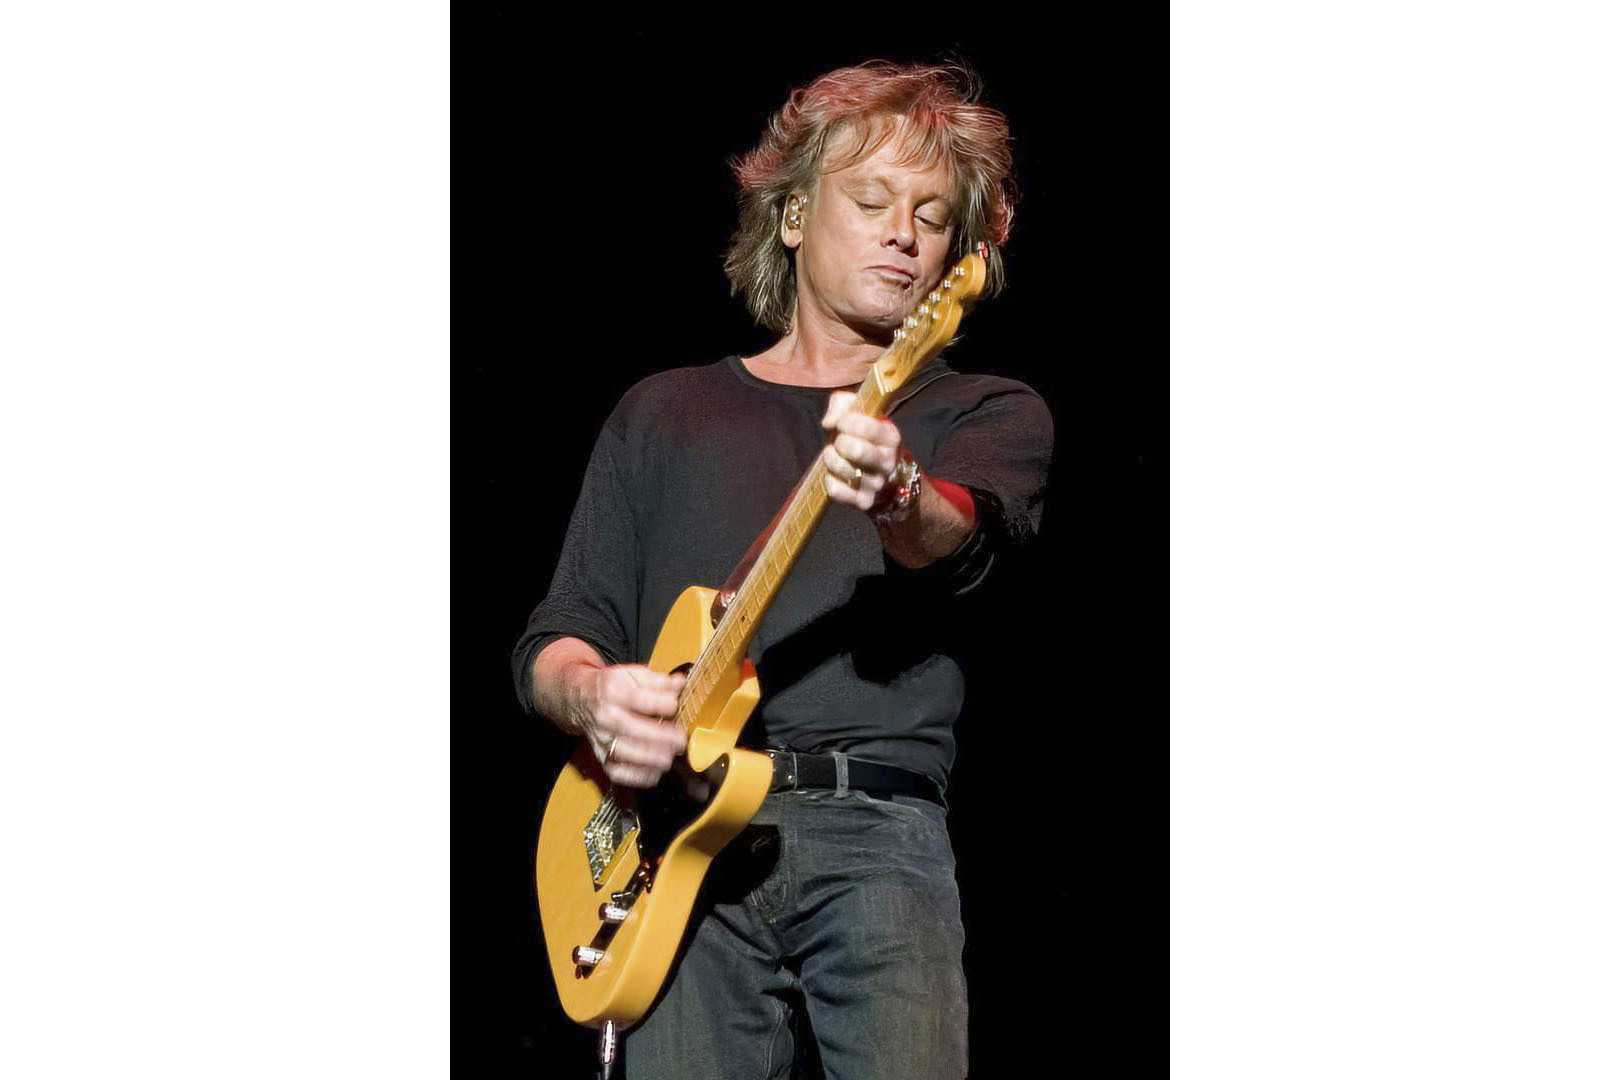 This undated image released by Raspberries LLC shows Eric Carmen who fronted the power-pop 1970s band the Raspberries and later had soaring pop hits like “All by Myself” and “Hungry Eyes” from the hit “Dirty Dancing” soundtrack. His death was announced on his website by his wife, Amy Carmen, who did not reveal a cause, saying only that he died “in his sleep, over the weekend.” He was 74. (Gene Taylor/Raspberries LLC via AP)